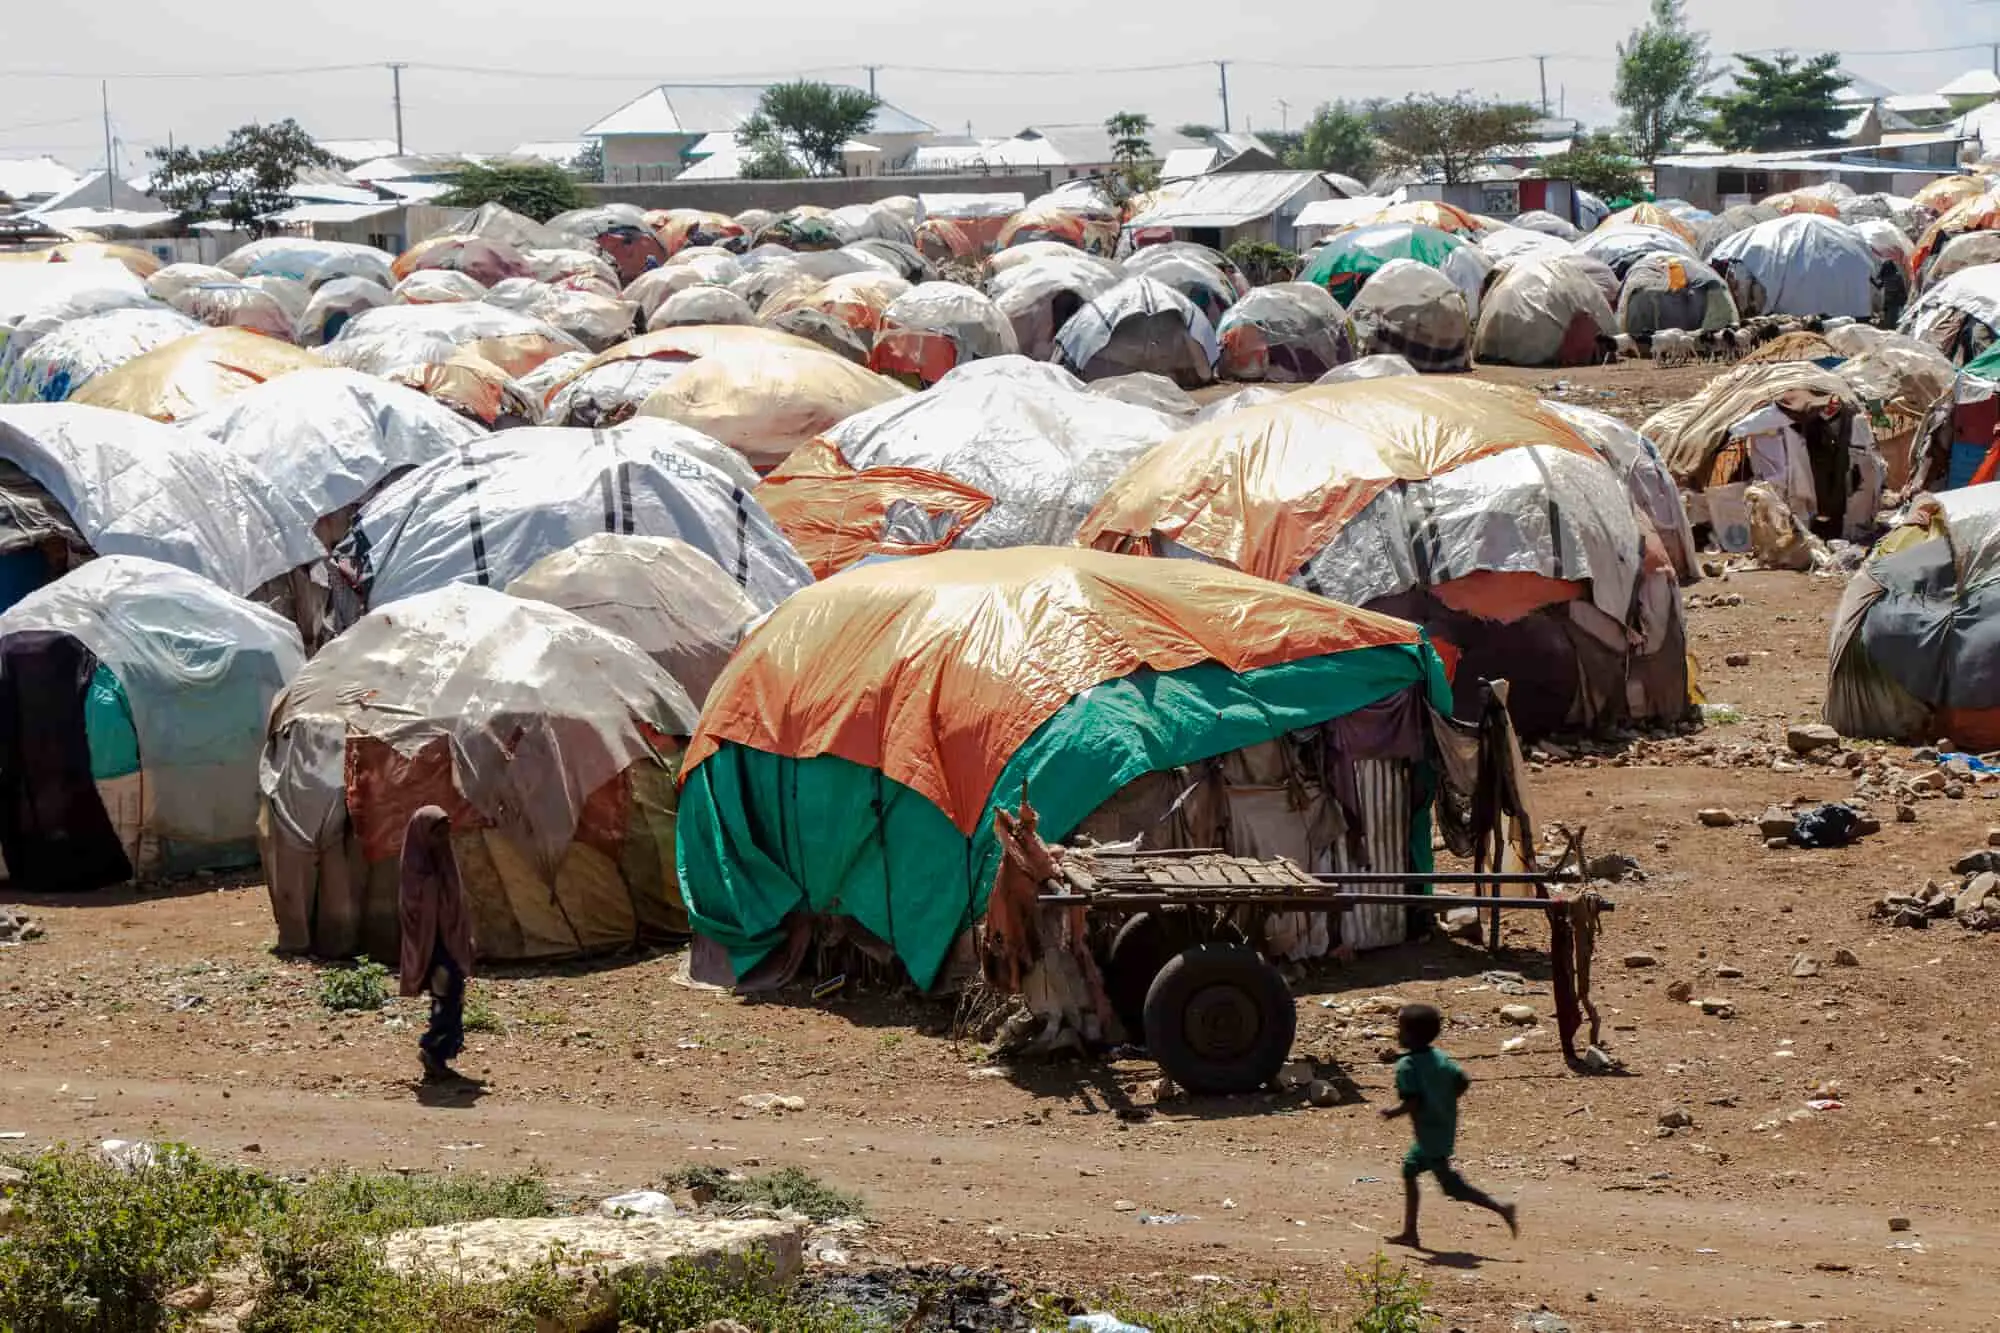 Displacement camp in East Africa